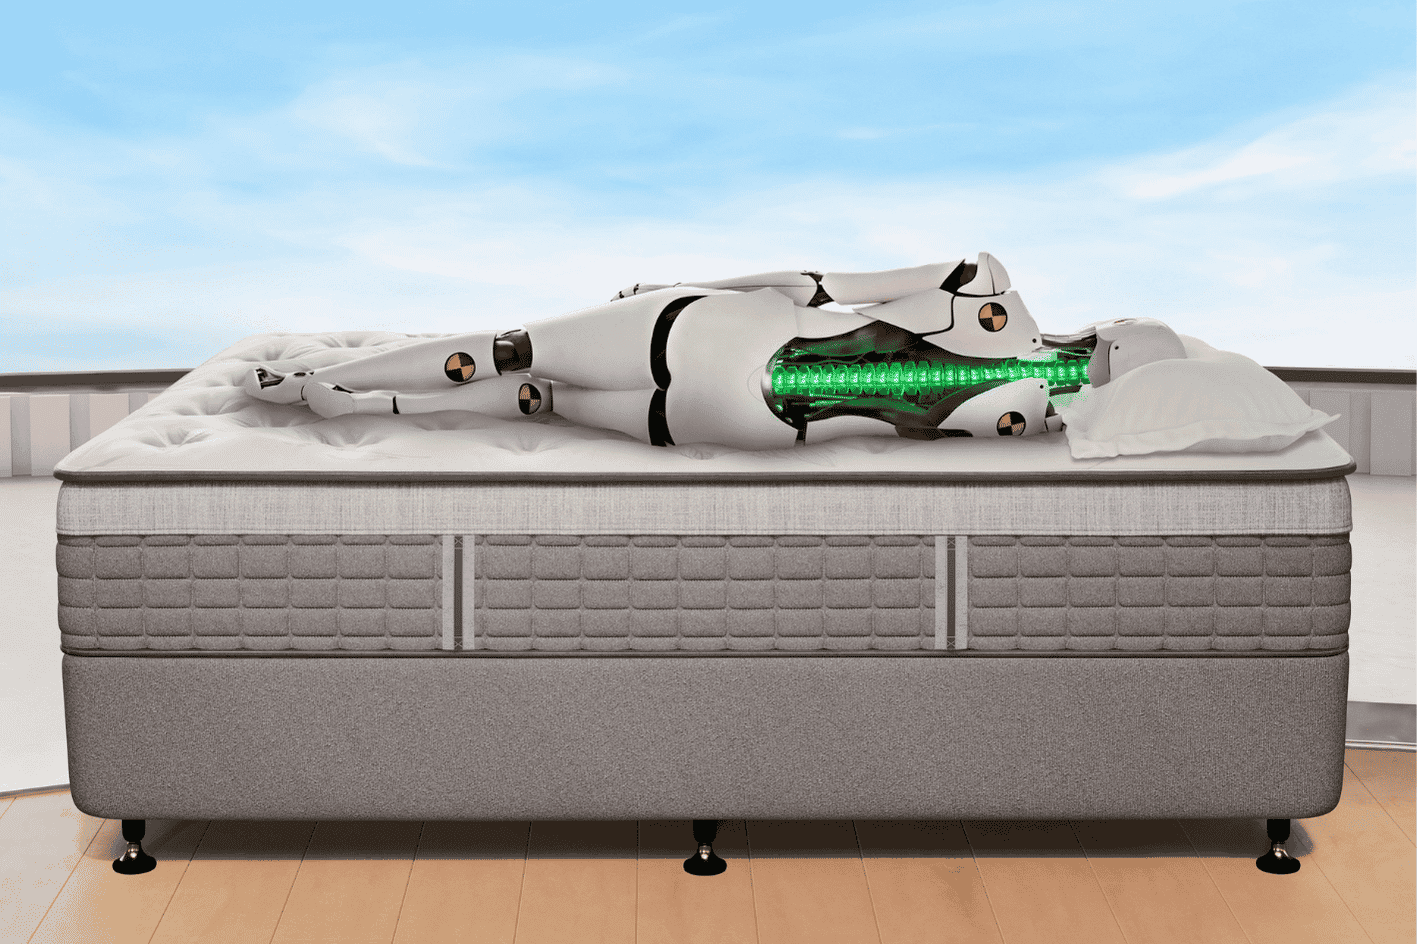 Crash test dummy with green spine lies on their side on a Sealy mattress